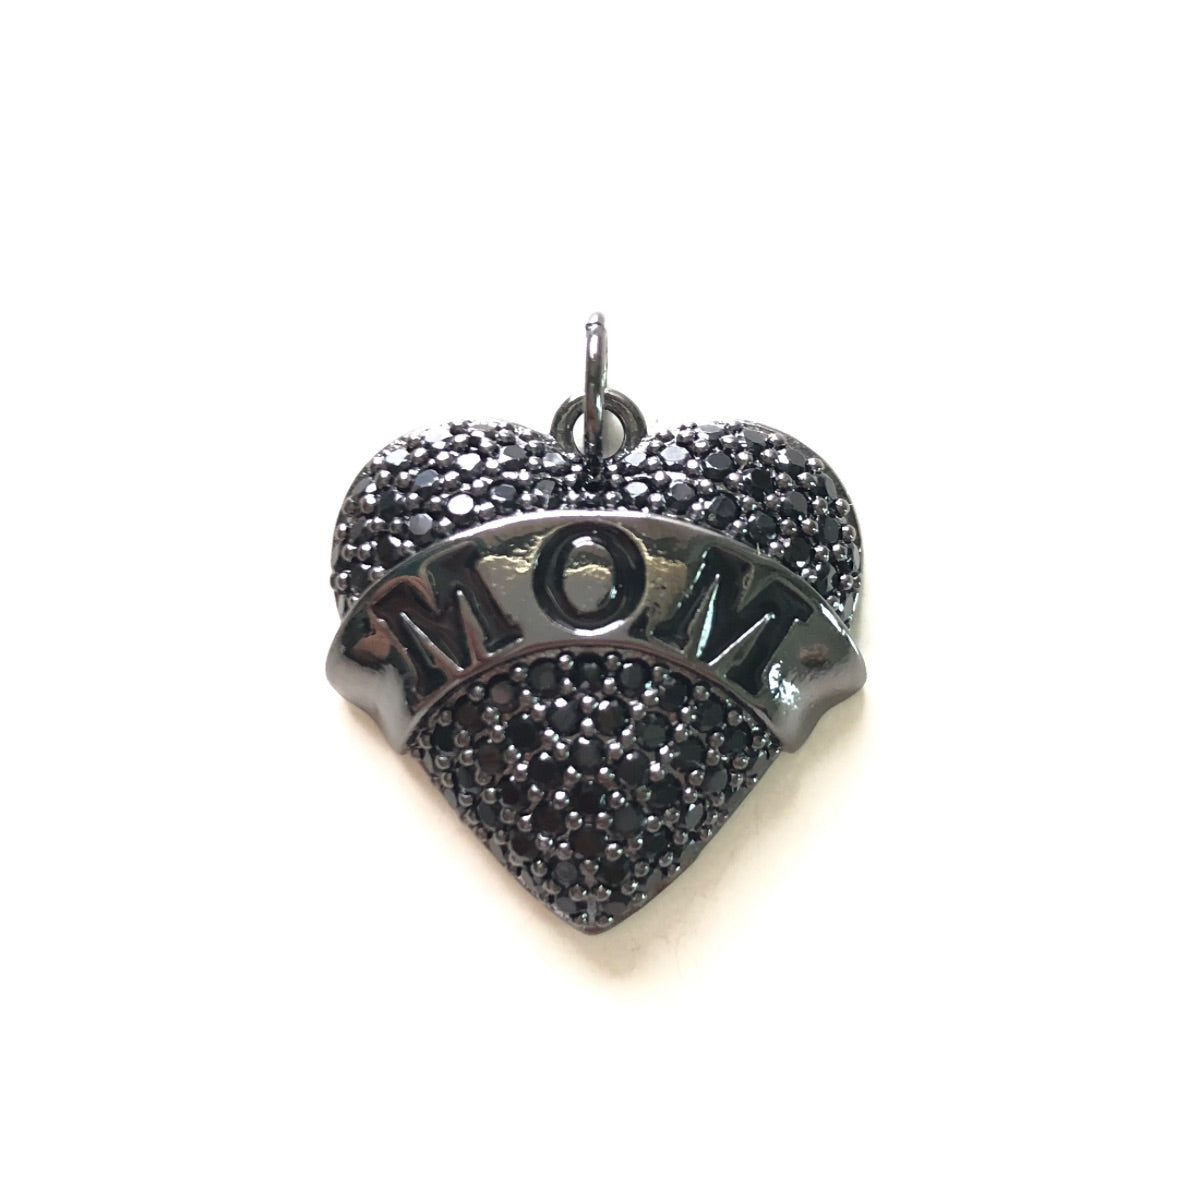 10pcs/lot CZ Pave Mom Heart Word Charms-Mother's Day Black on Black CZ Paved Charms Hearts Mother's Day New Charms Arrivals Charms Beads Beyond